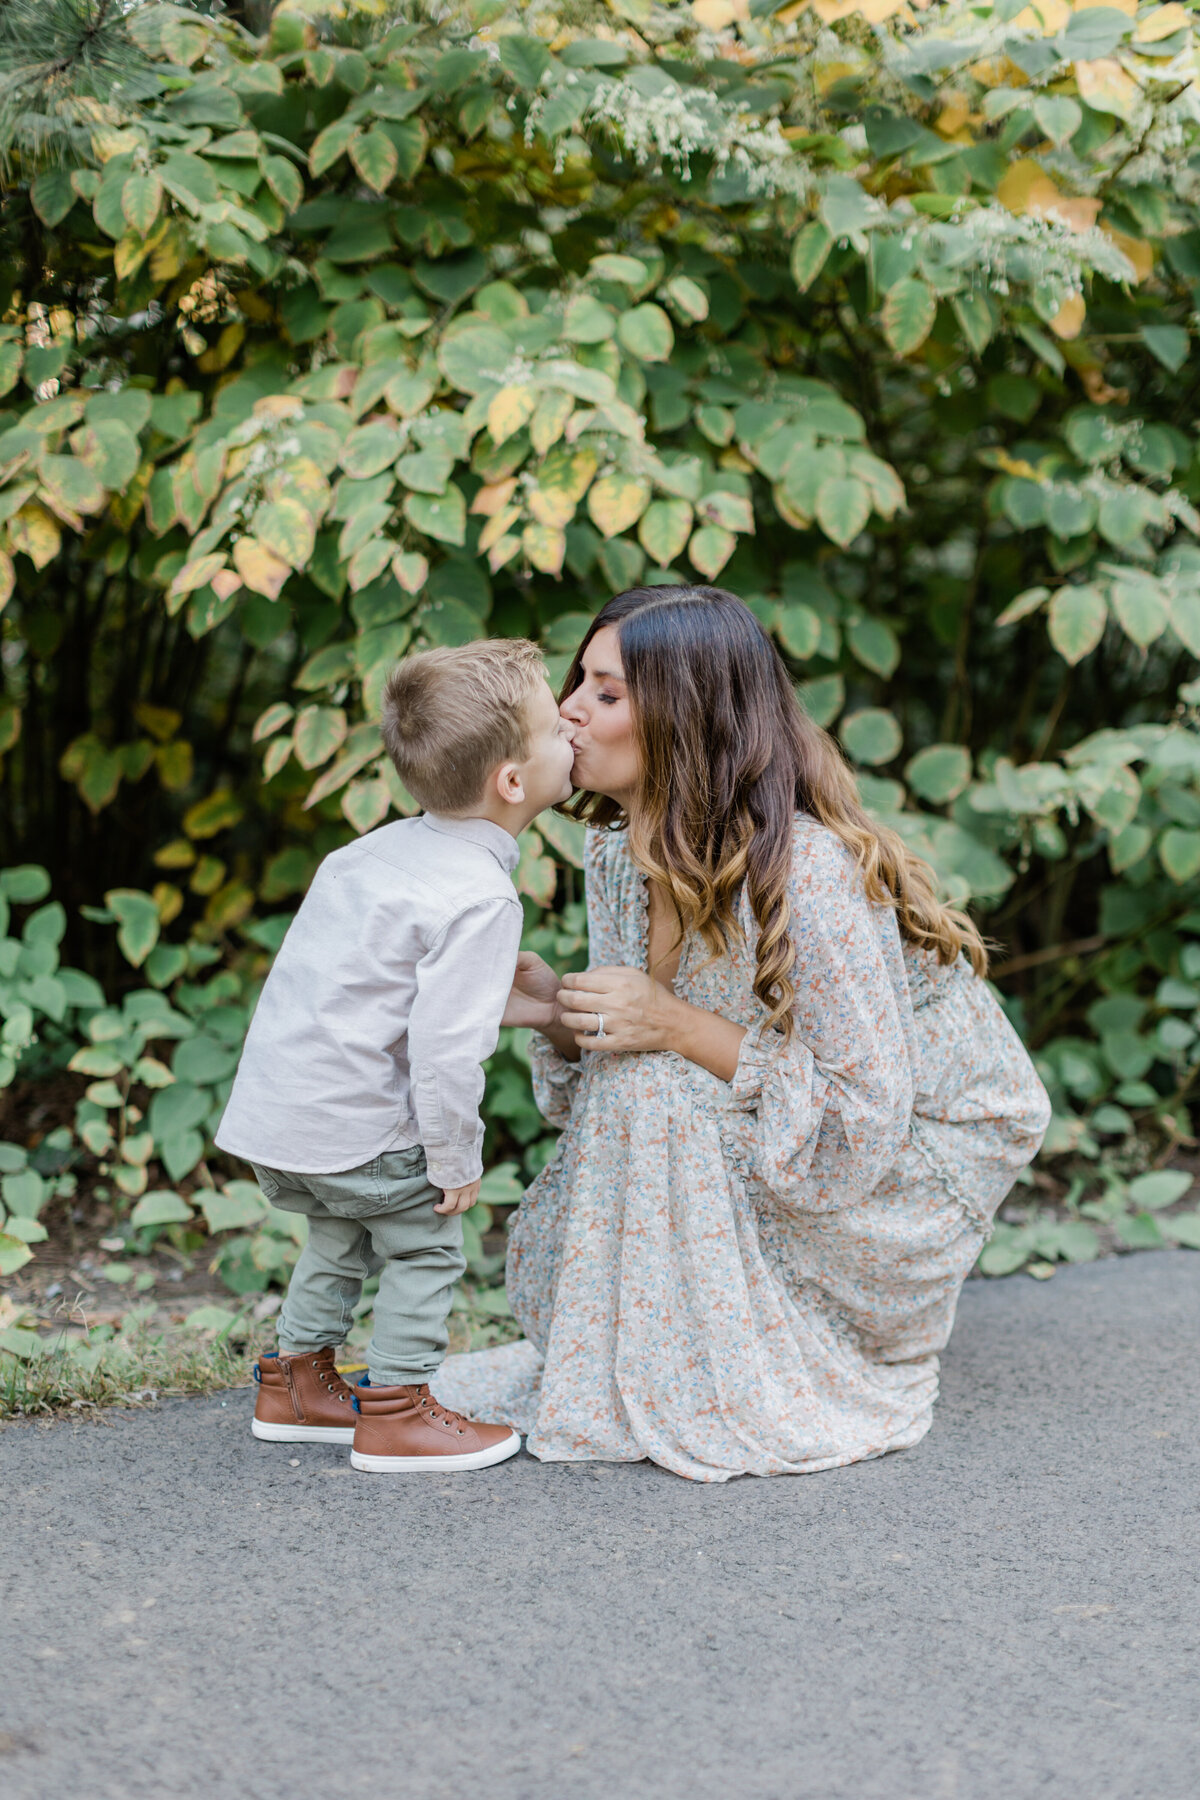 mom kissing her toddler son in front of lush greenery in a park photographed by Family Photographer South Jersey Tara Federico